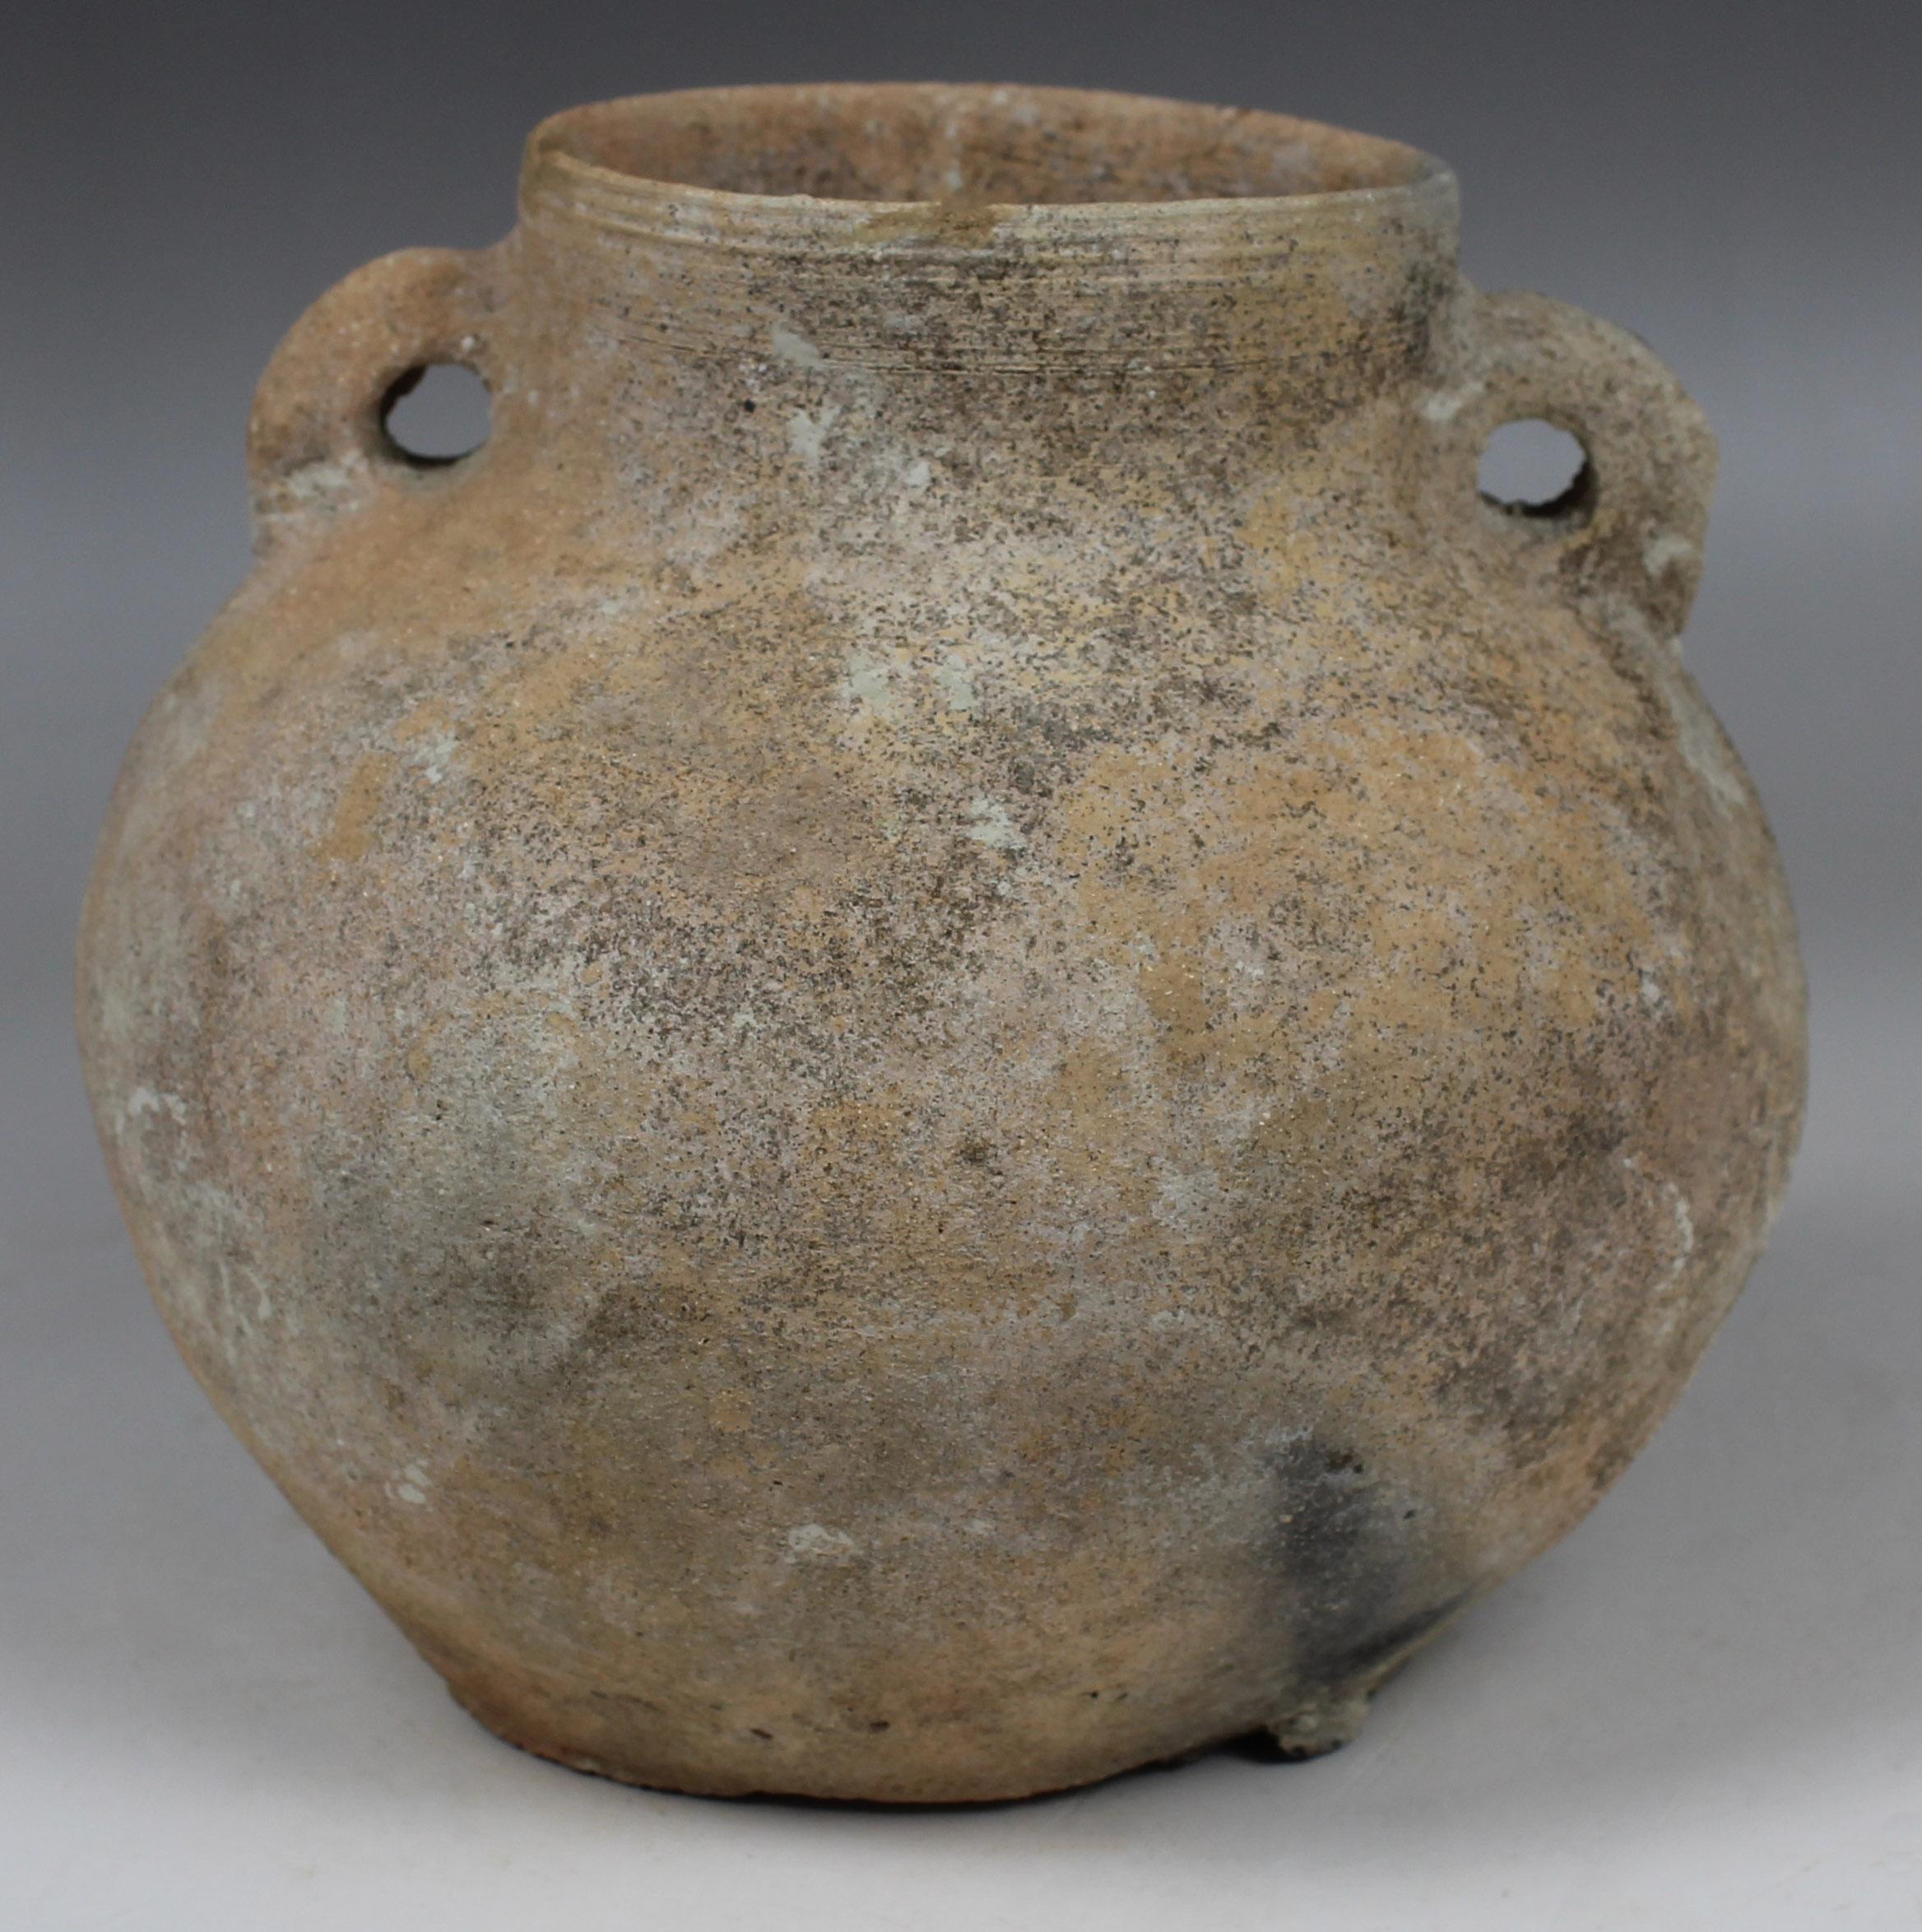 ITEM: Amphoriskos
MATERIAL: Pottery
CULTURE: Bronze Age
PERIOD: 2400 – 2000 B.C
DIMENSIONS: 140 mm x 145 mm
CONDITION: Good condition
PROVENANCE: Ex Emeritus collection (USA), collected from the 1950’s to the 1980’s by a distinguished university